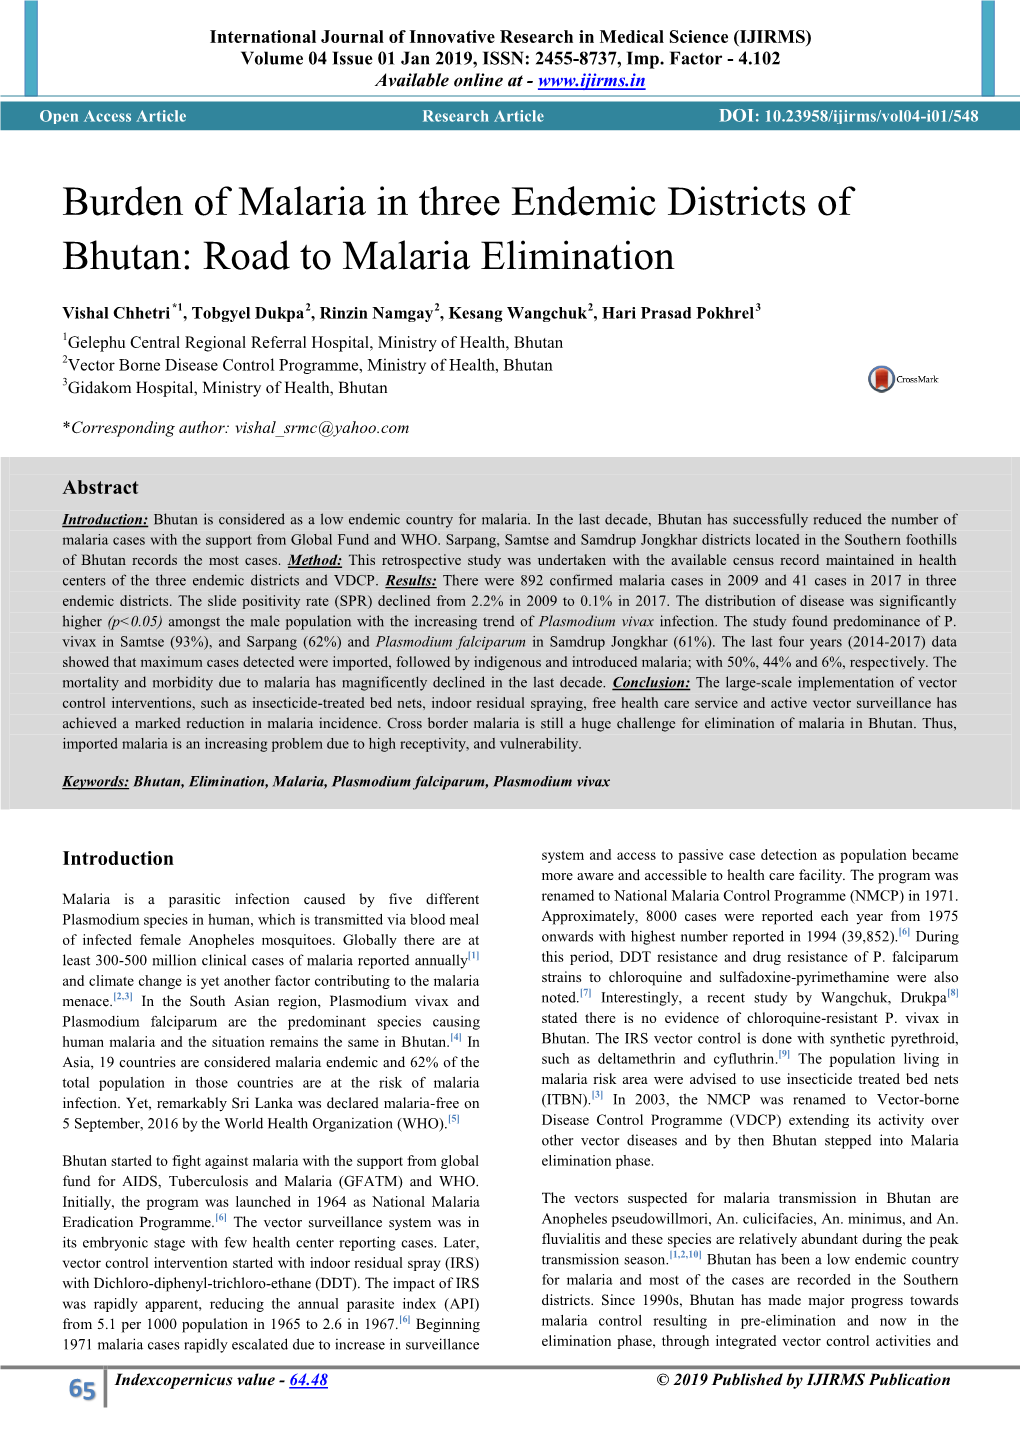 Burden of Malaria in Three Endemic Districts of Bhutan: Road to Malaria Elimination